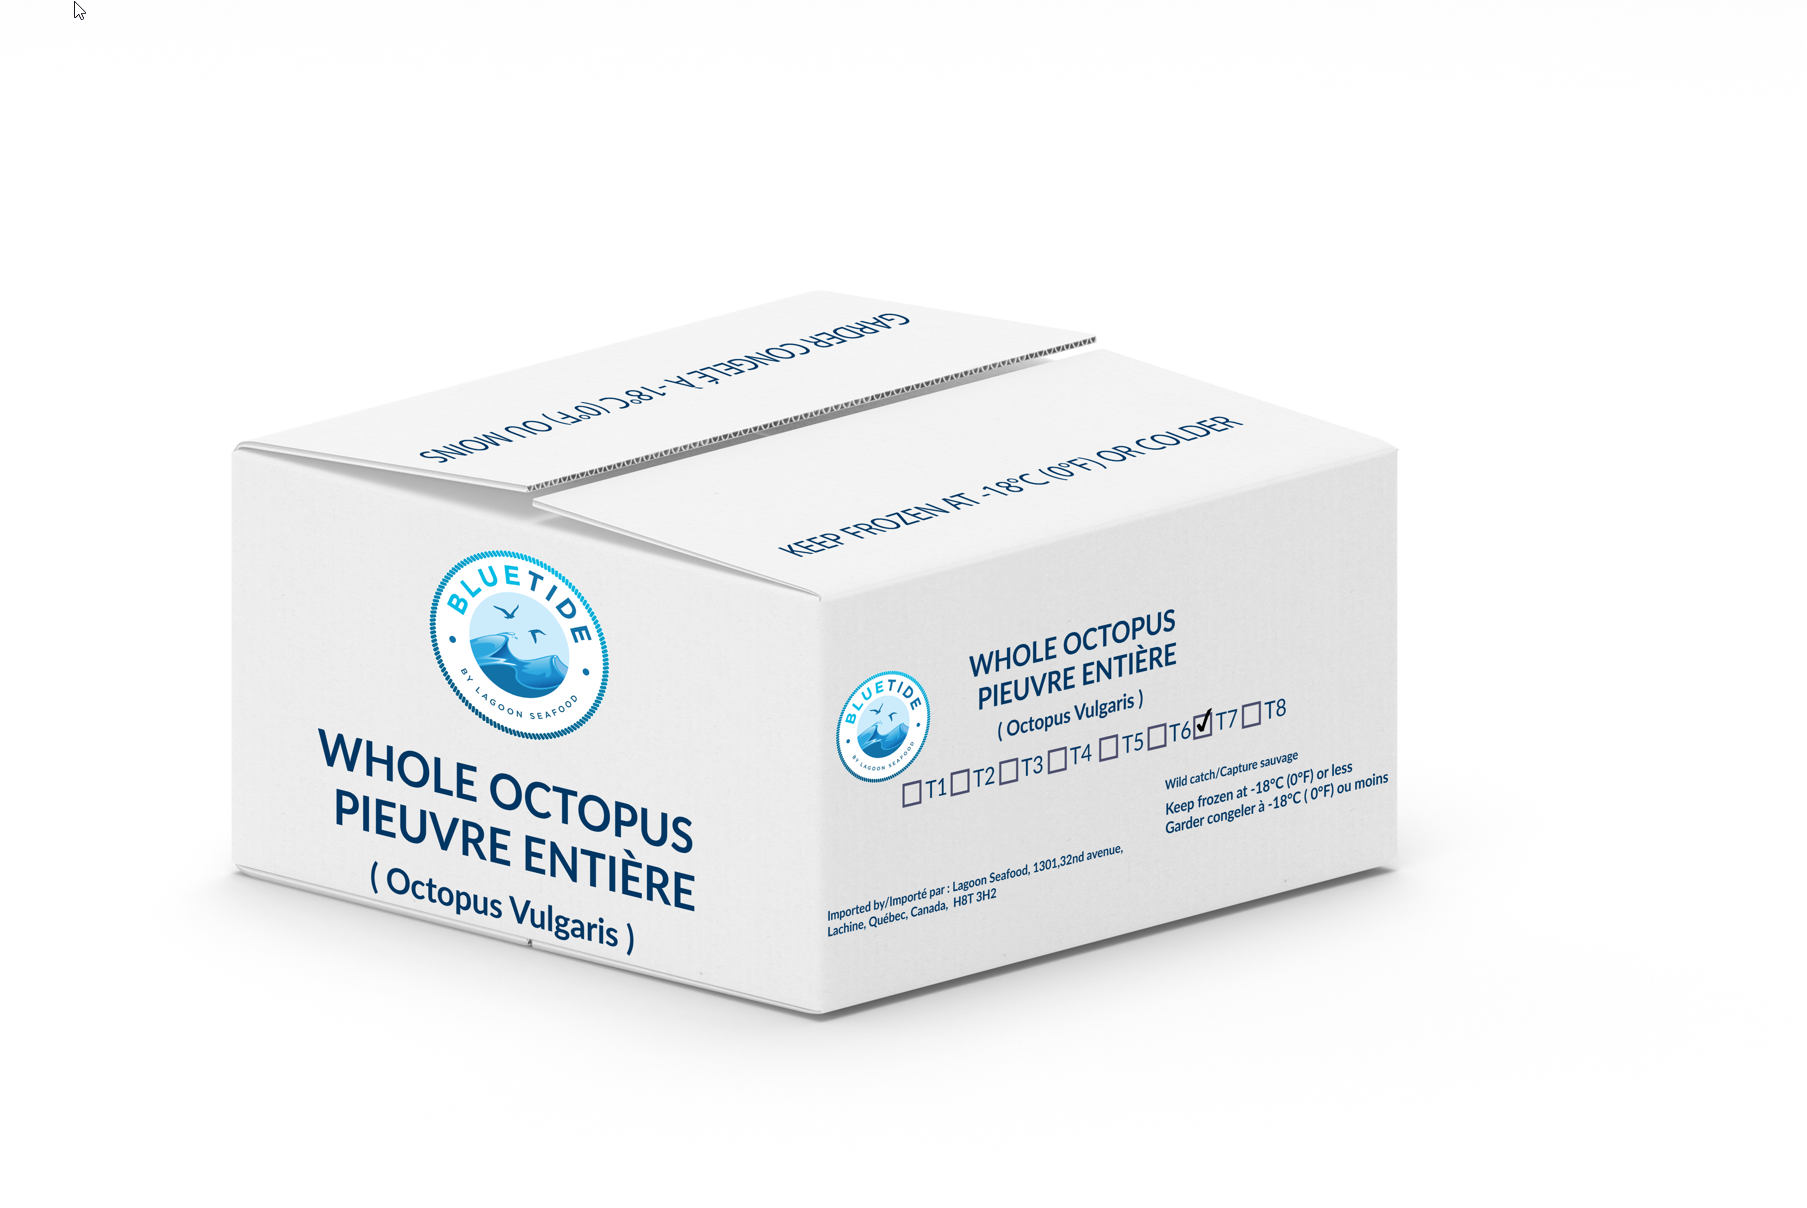 Frozen Wild Octopus Whole – Individually Quick Frozen (IQF) T6 – 12kg